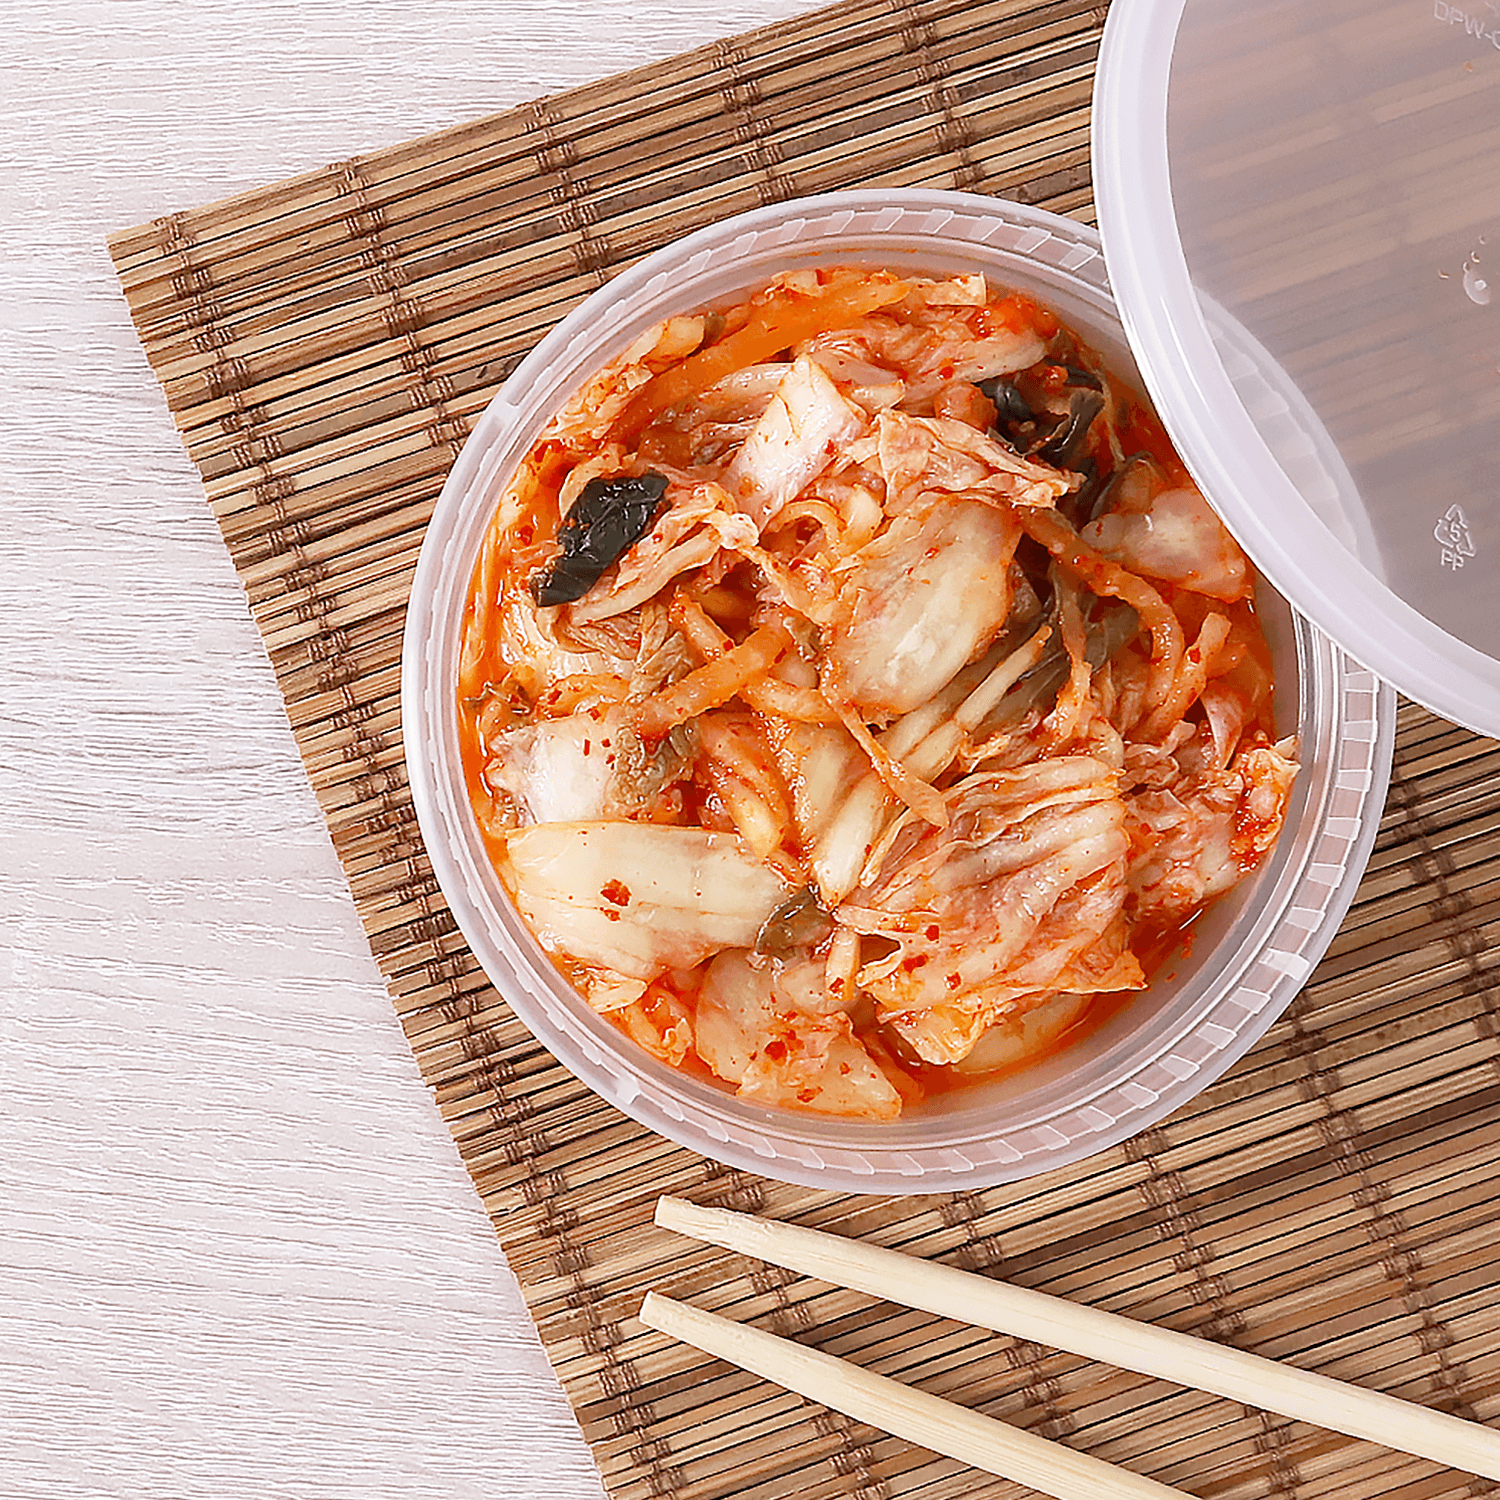 Clear Karat 8oz PP Plastic Injection Molded Deli Containers & Lids with kimchi and chopsticks